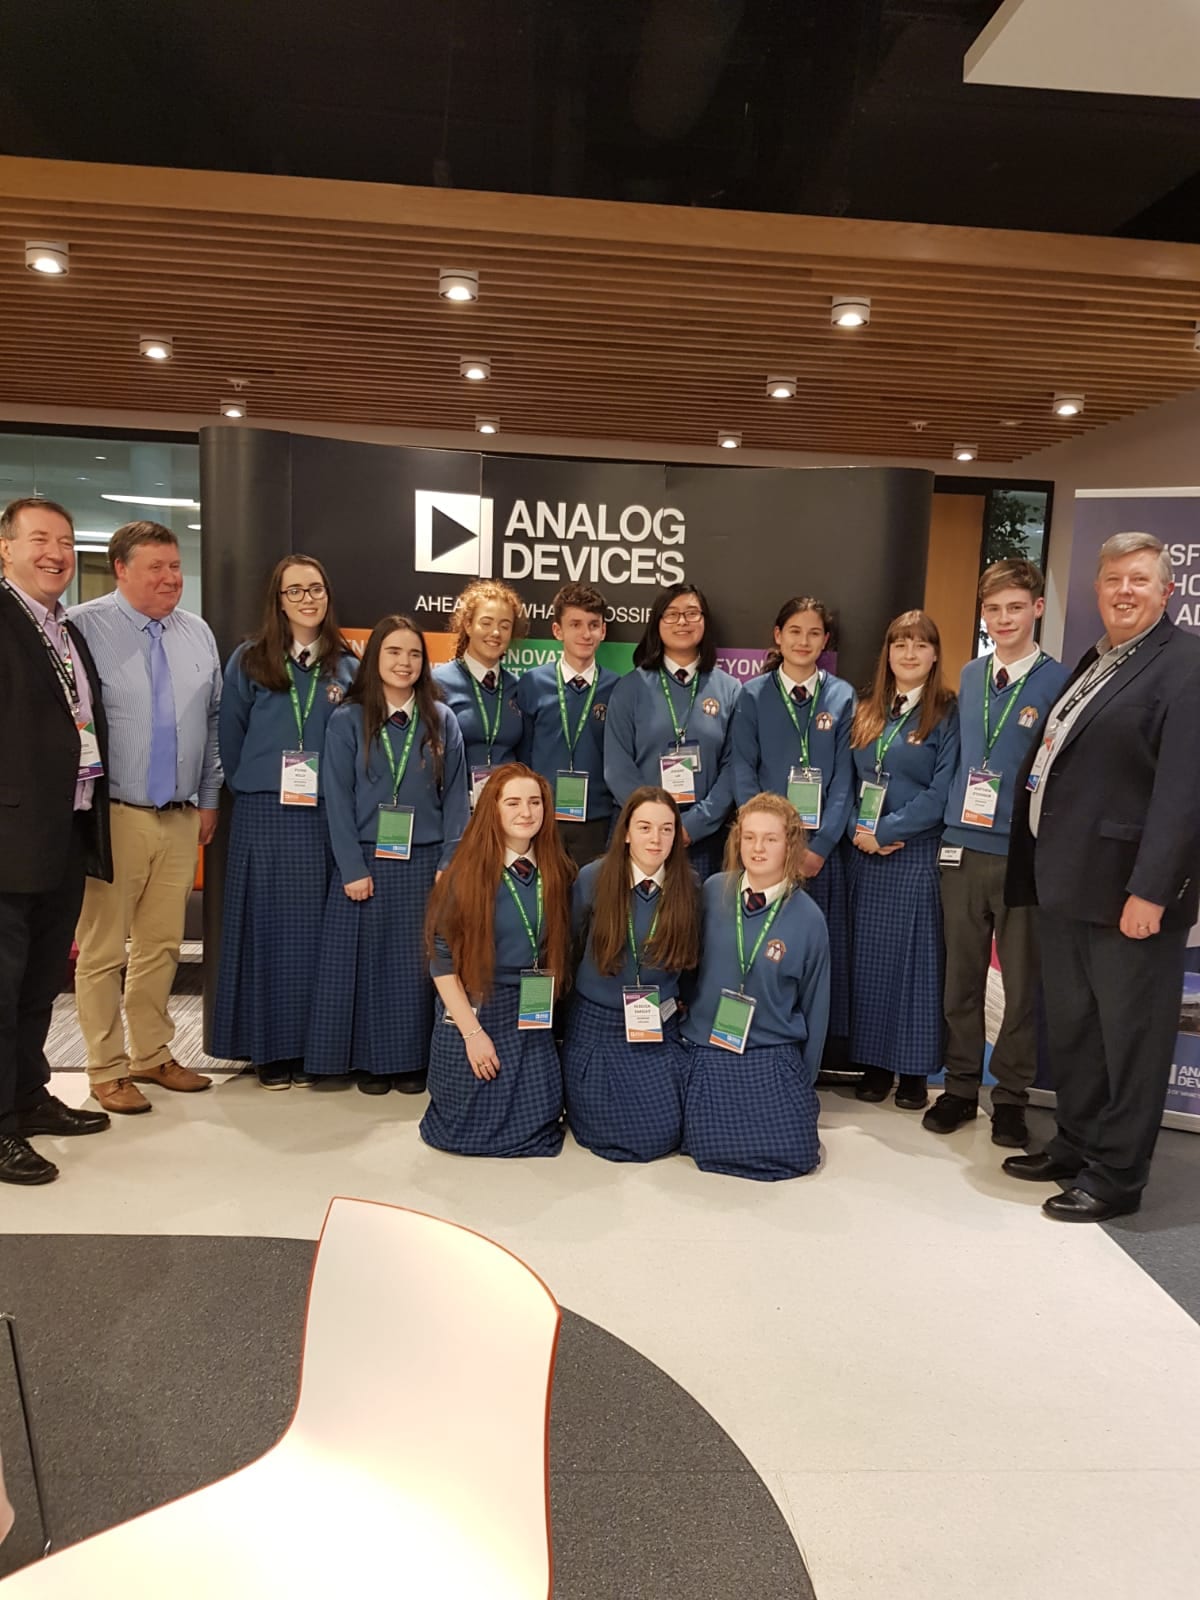 Desmond College BT Young Scientist and Technology 2019 finalists pictured at a host event organised by Analog Devices